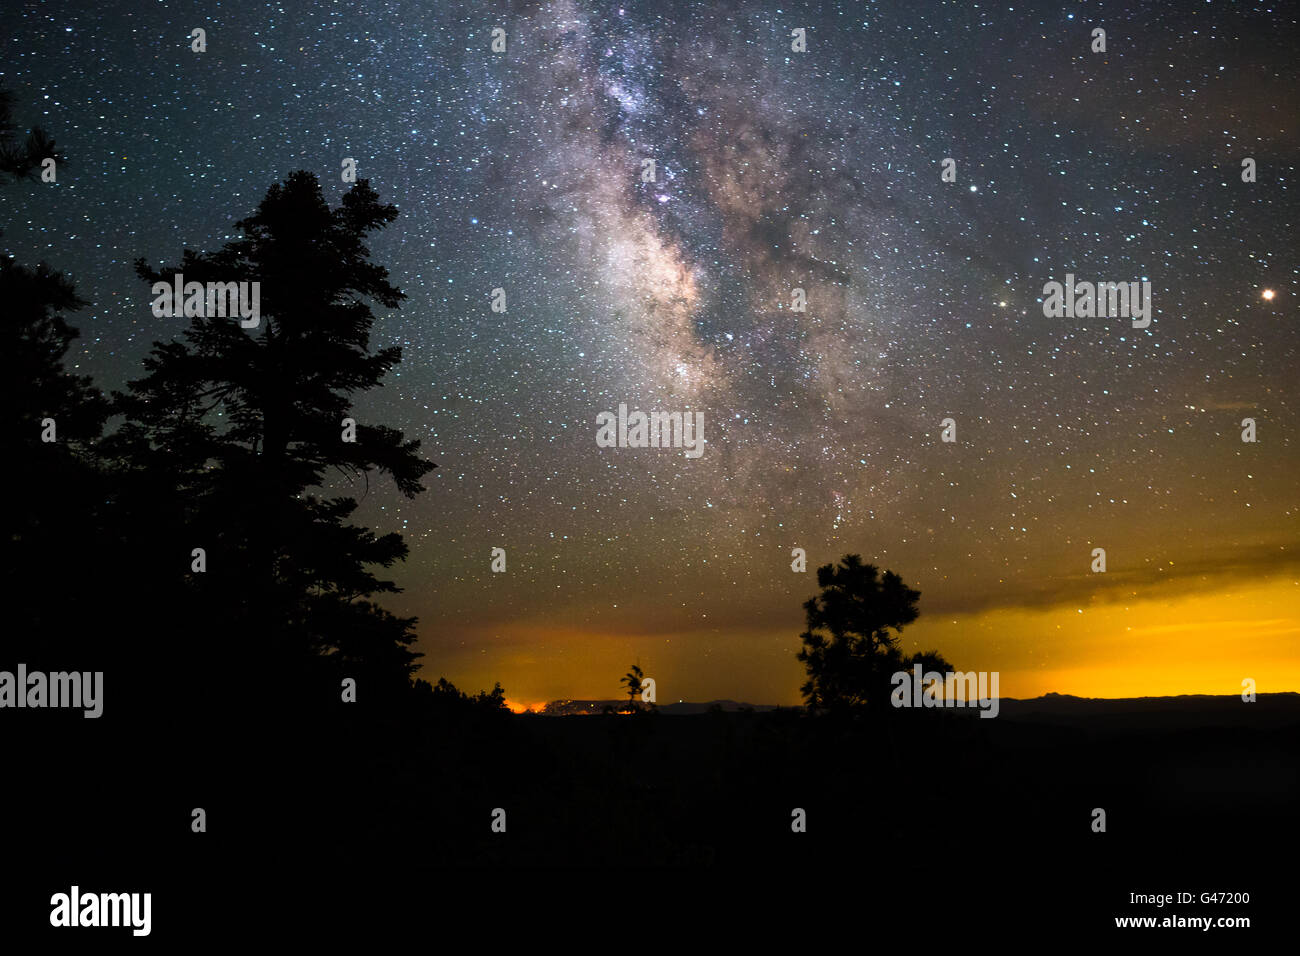 The Milky Way galaxy and night sky above a forest fire near the Mogollon Rim in Arizona Stock Photo